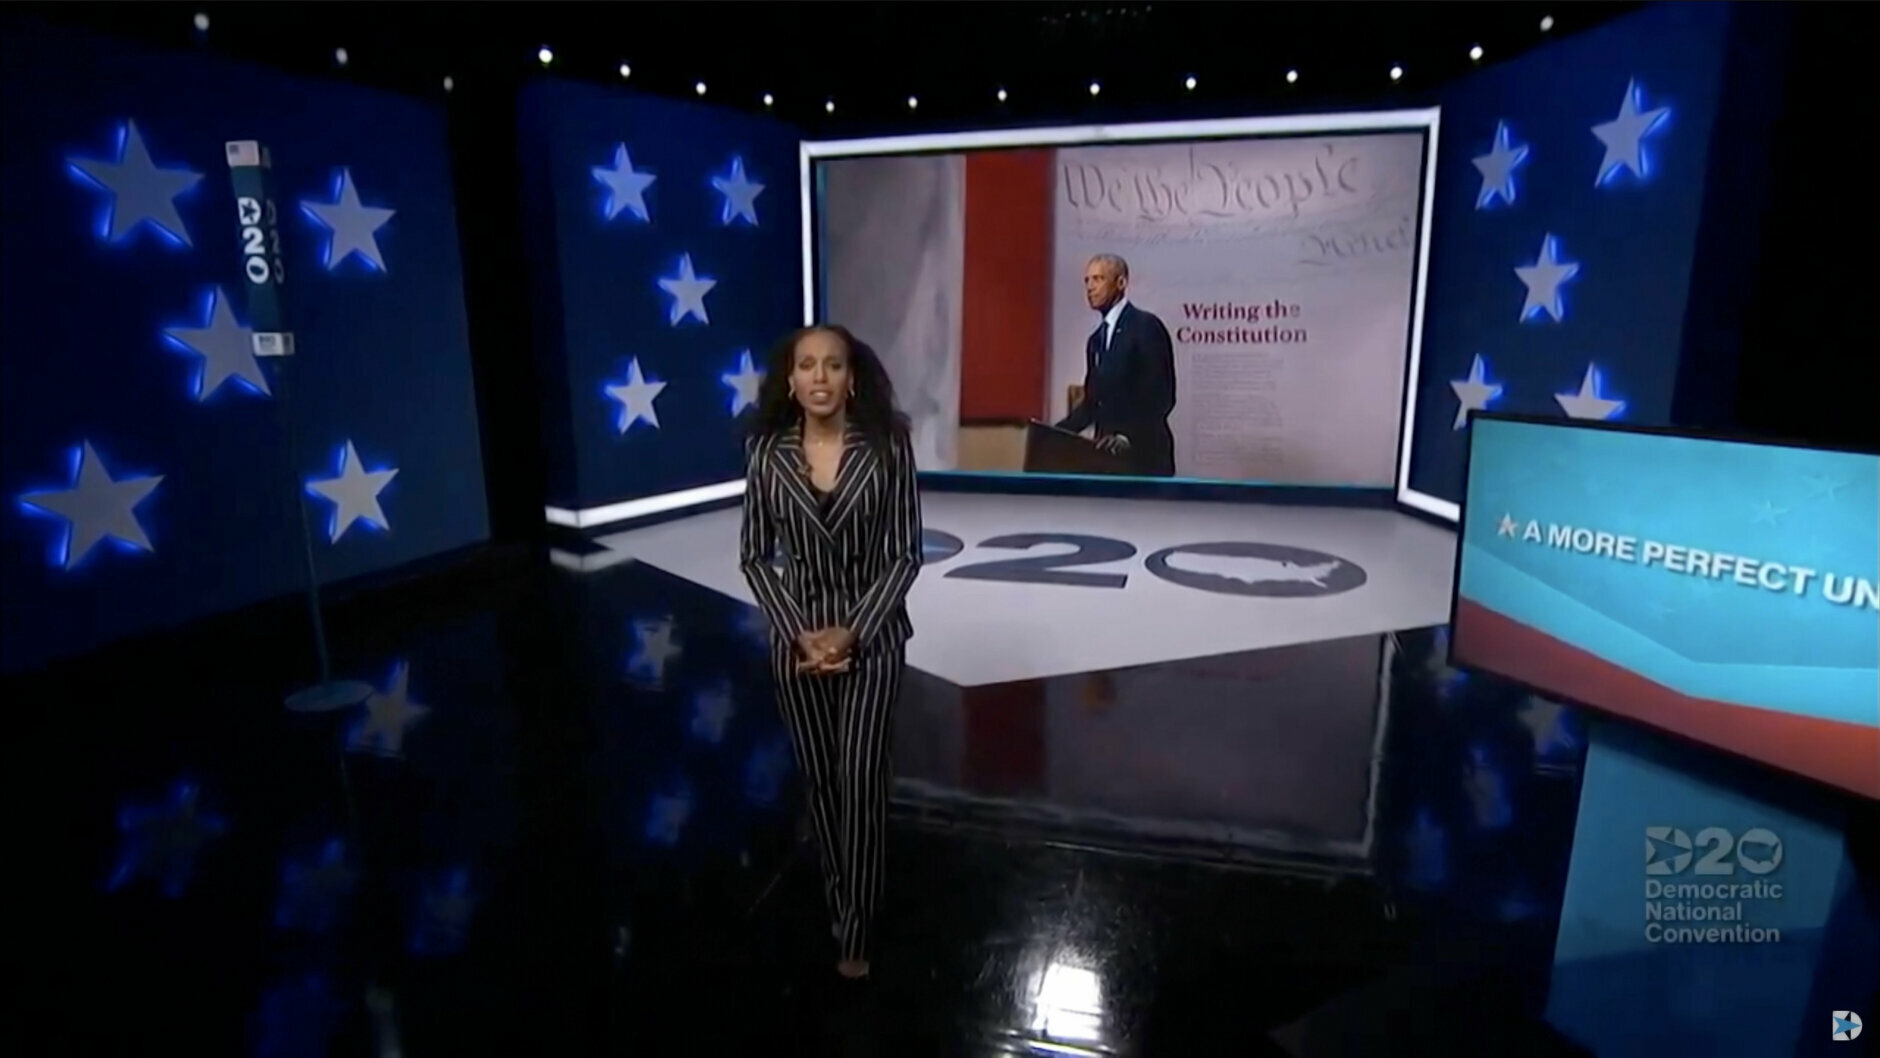 MILWAUKEE, WI - AUGUST 19: In this screenshot from the DNCC’s livestream of the 2020 Democratic National Convention, actress and activist Kerry Washington introduces former U.S. President Barack Obama during the virtual convention on August 19, 2020.  The convention, which was once expected to draw 50,000 people to Milwaukee, Wisconsin, is now taking place virtually due to the coronavirus pandemic.  (Photo by DNCC via Getty Images)  (Photo by Handout/DNCC via Getty Images)